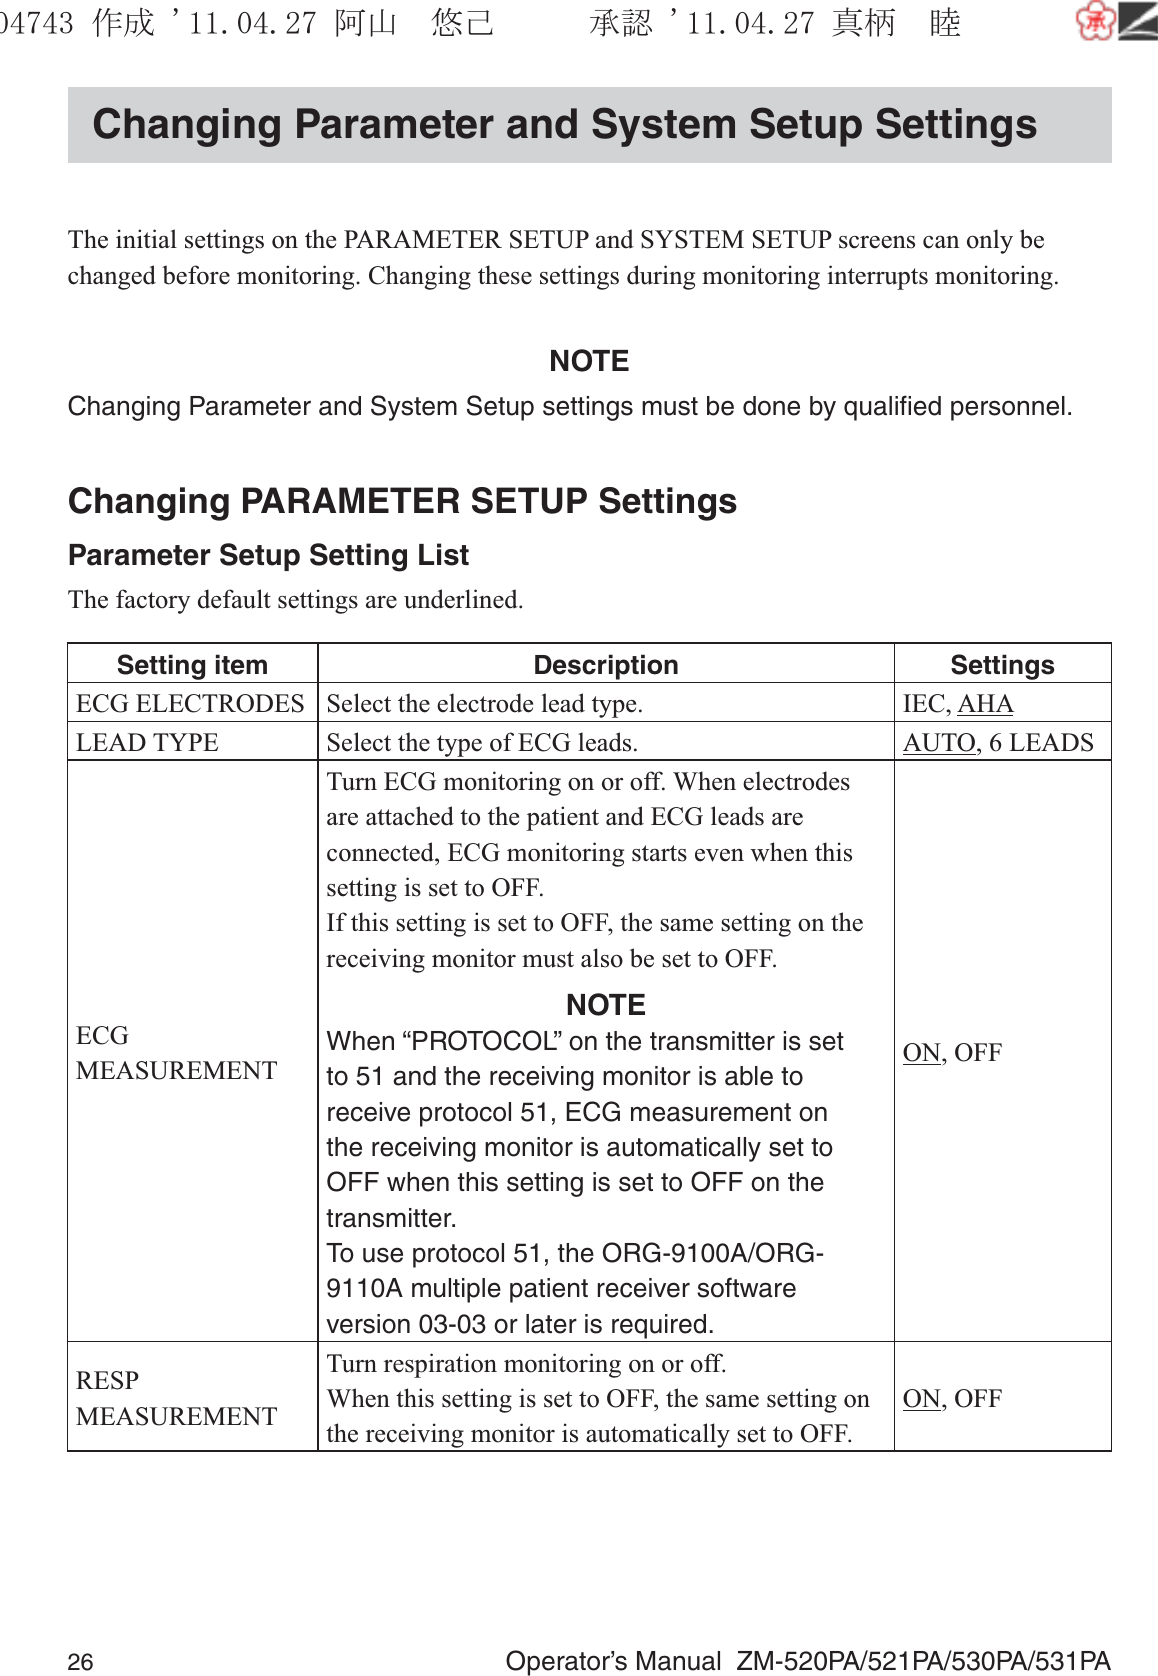 26  Operator’s Manual  ZM-520PA/521PA/530PA/531PAChanging Parameter and System Setup SettingsThe initial settings on the PARAMETER SETUP and SYSTEM SETUP screens can only be changed before monitoring. Changing these settings during monitoring interrupts monitoring.NOTEChanging Parameter and System Setup settings must be done by qualiﬁed personnel.Changing PARAMETER SETUP SettingsParameter Setup Setting ListThe factory default settings are underlined.Setting item Description SettingsECG ELECTRODES Select the electrode lead type. IEC, AHALEAD TYPE Select the type of ECG leads. AUTO, 6 LEADSECG MEASUREMENTTurn ECG monitoring on or off. When electrodes are attached to the patient and ECG leads are connected, ECG monitoring starts even when this setting is set to OFF.If this setting is set to OFF, the same setting on the receiving monitor must also be set to OFF.NOTEWhen “PROTOCOL” on the transmitter is set to 51 and the receiving monitor is able to receive protocol 51, ECG measurement on the receiving monitor is automatically set to OFF when this setting is set to OFF on the transmitter. To use protocol 51, the ORG-9100A/ORG-9110A multiple patient receiver software version 03-03 or later is required.ON, OFFRESP MEASUREMENTTurn respiration monitoring on or off.When this setting is set to OFF, the same setting on the receiving monitor is automatically set to OFF.ON, OFF૞ᚑ㒙ጊޓᖘᏆ ᛚ⹺⌀ᨩޓ⌬